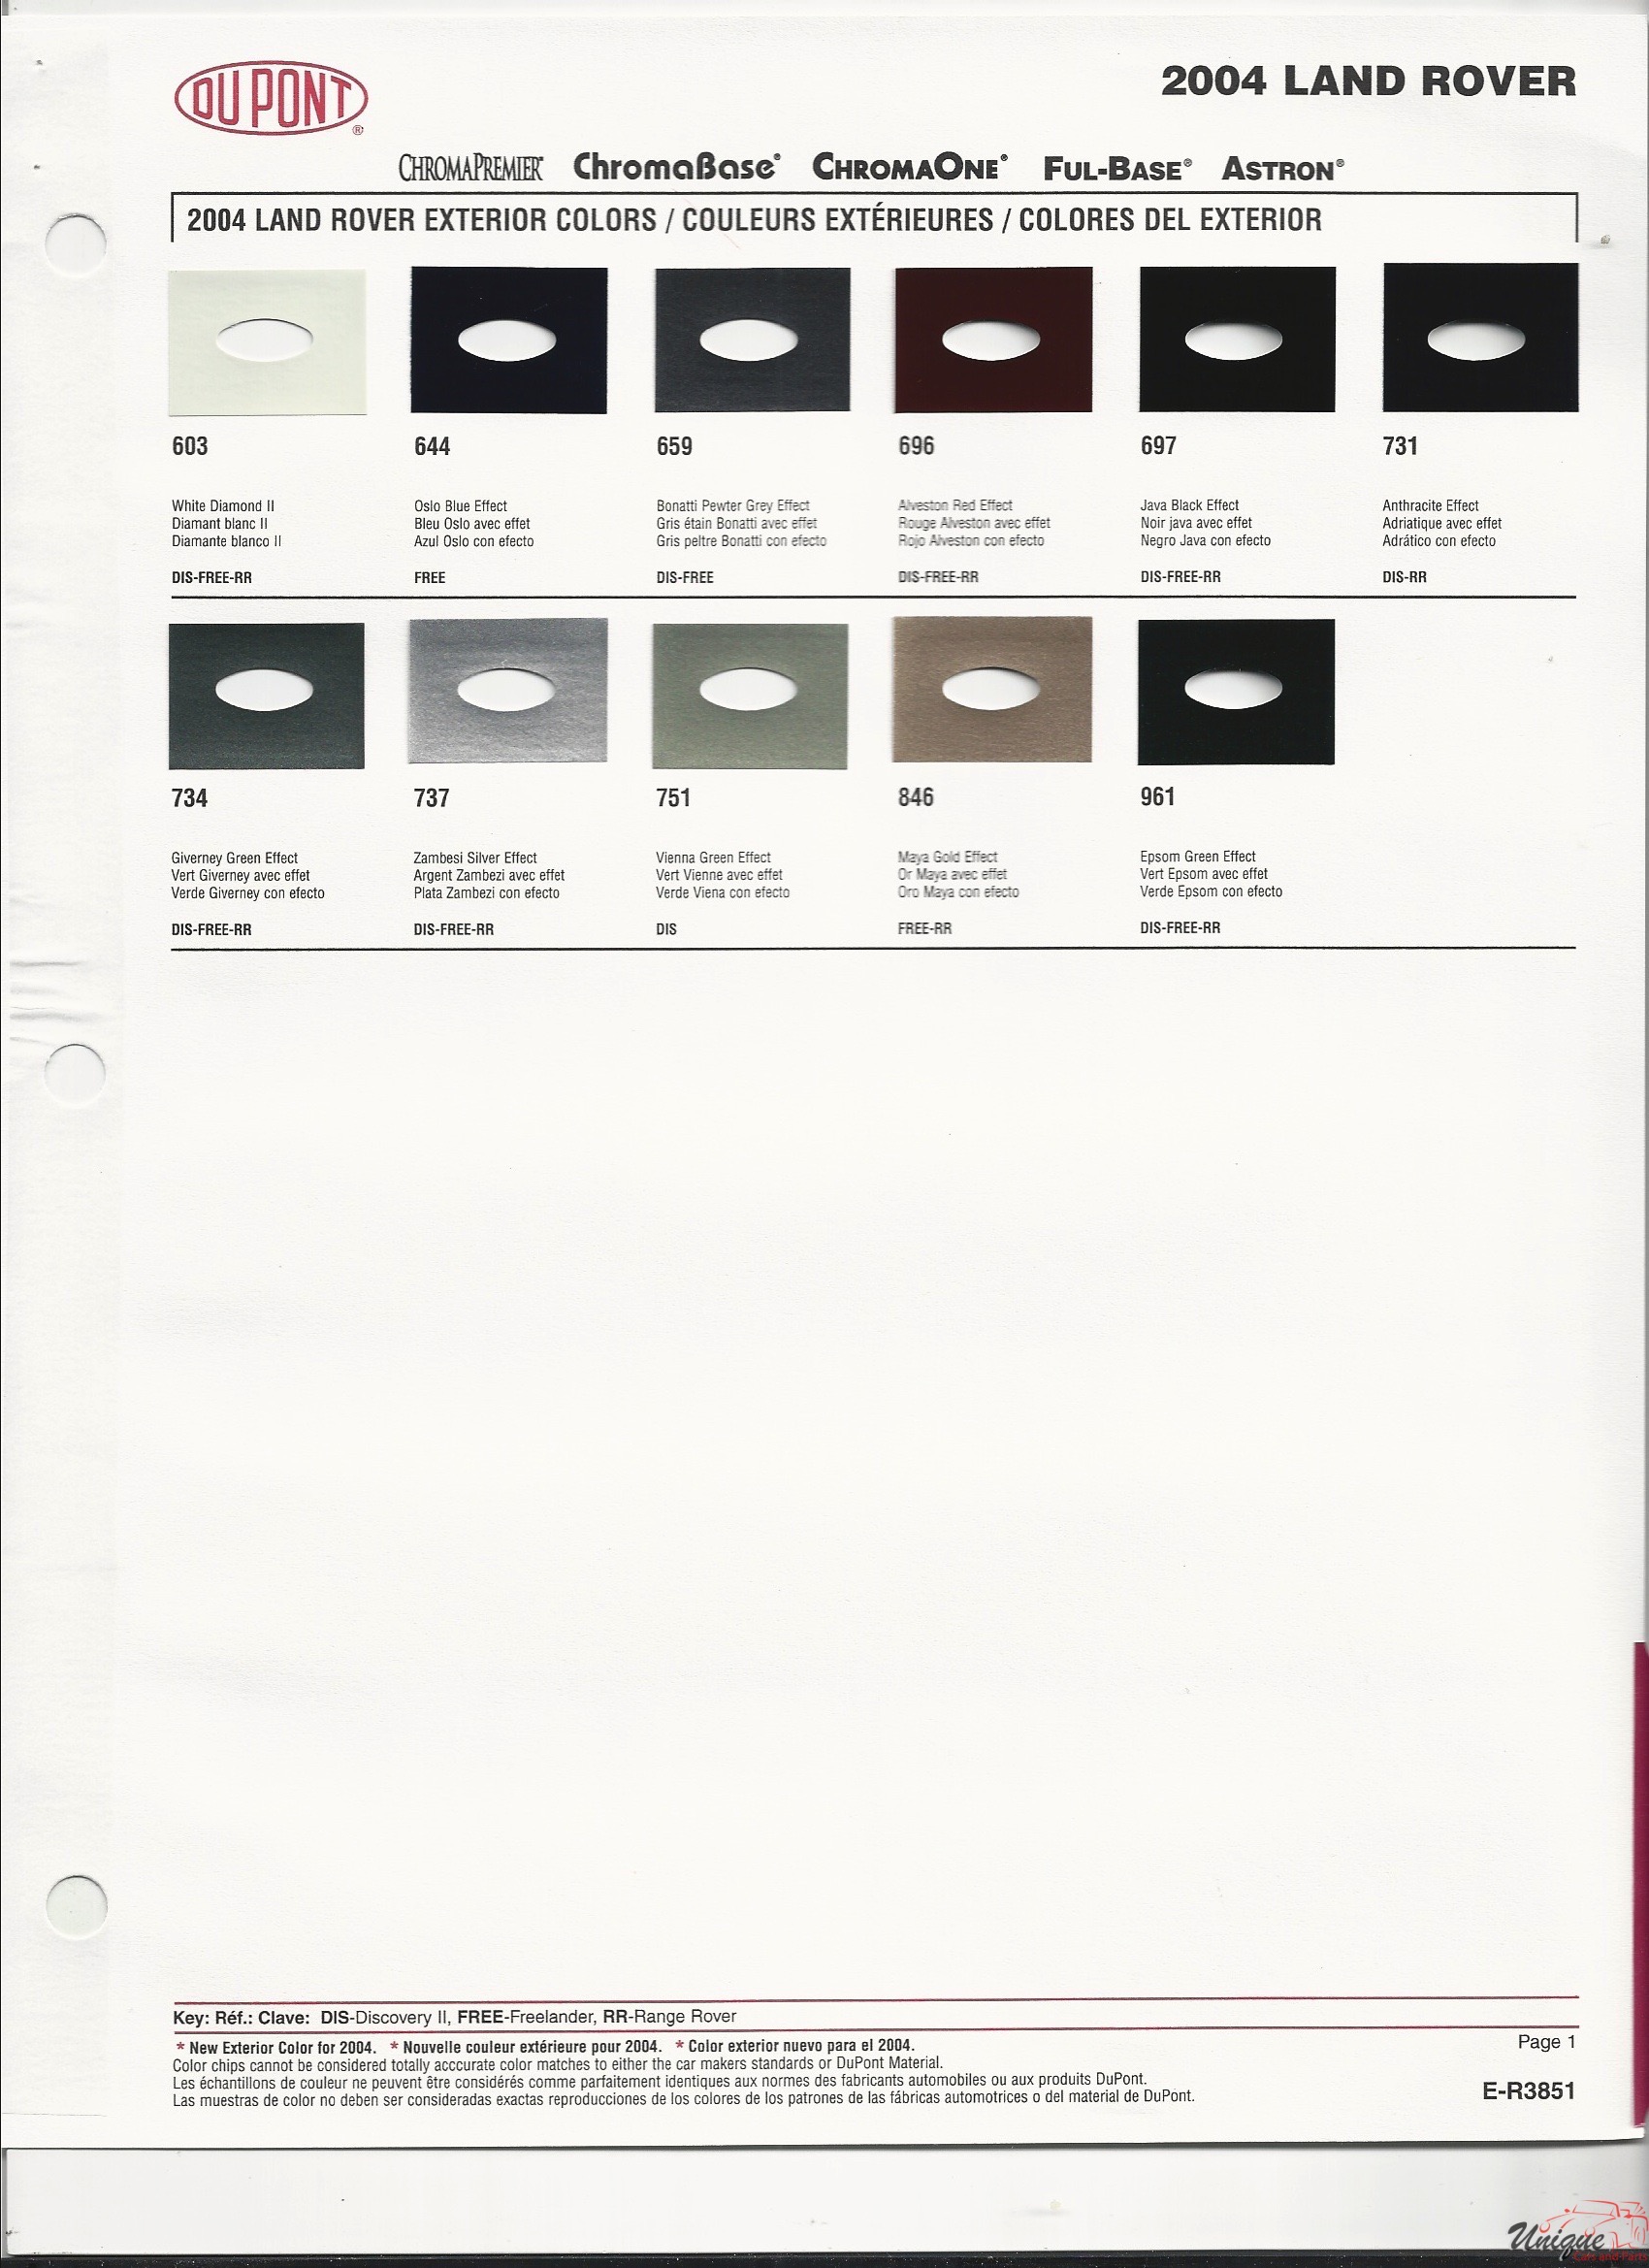 2004 Land Rover Paint Charts